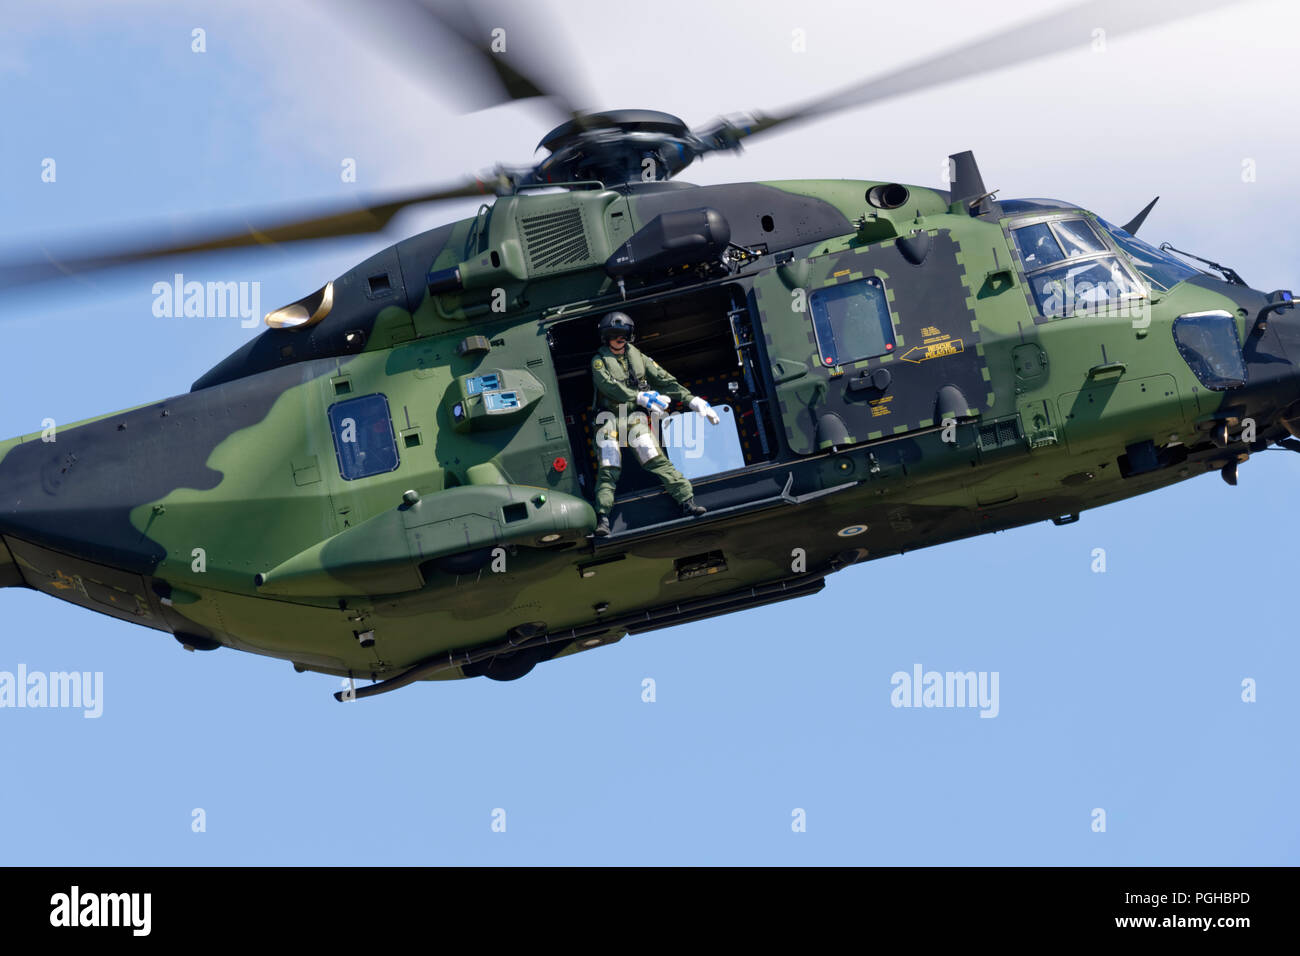 Finnish Army NH90 helicopter crewman demonstrates The Floss Dance while hovering over the display line at the Royal International Air Tattoo Stock Photo